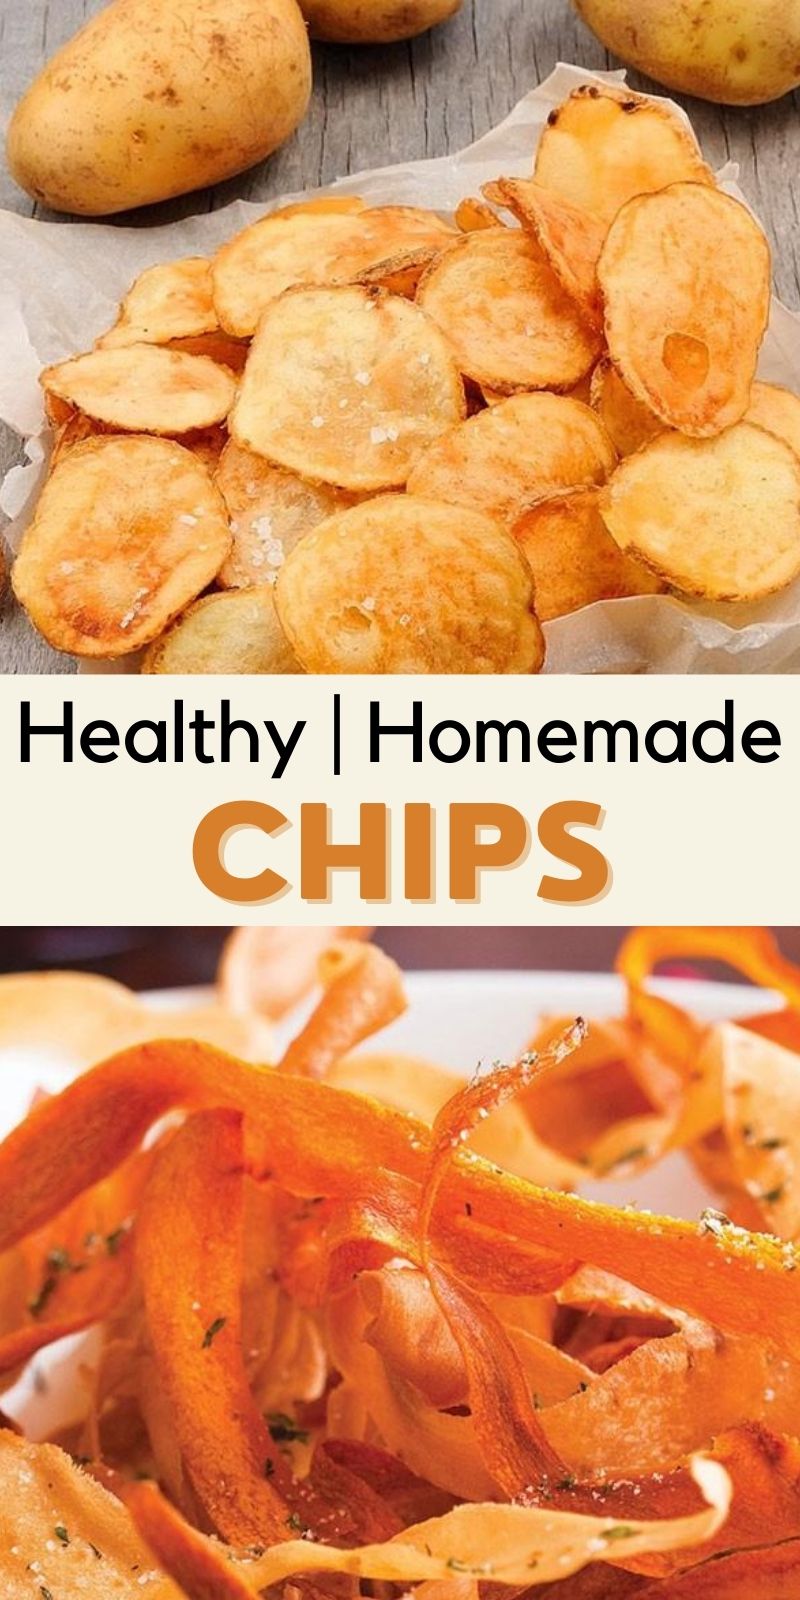 Healthy, Homemade Chips